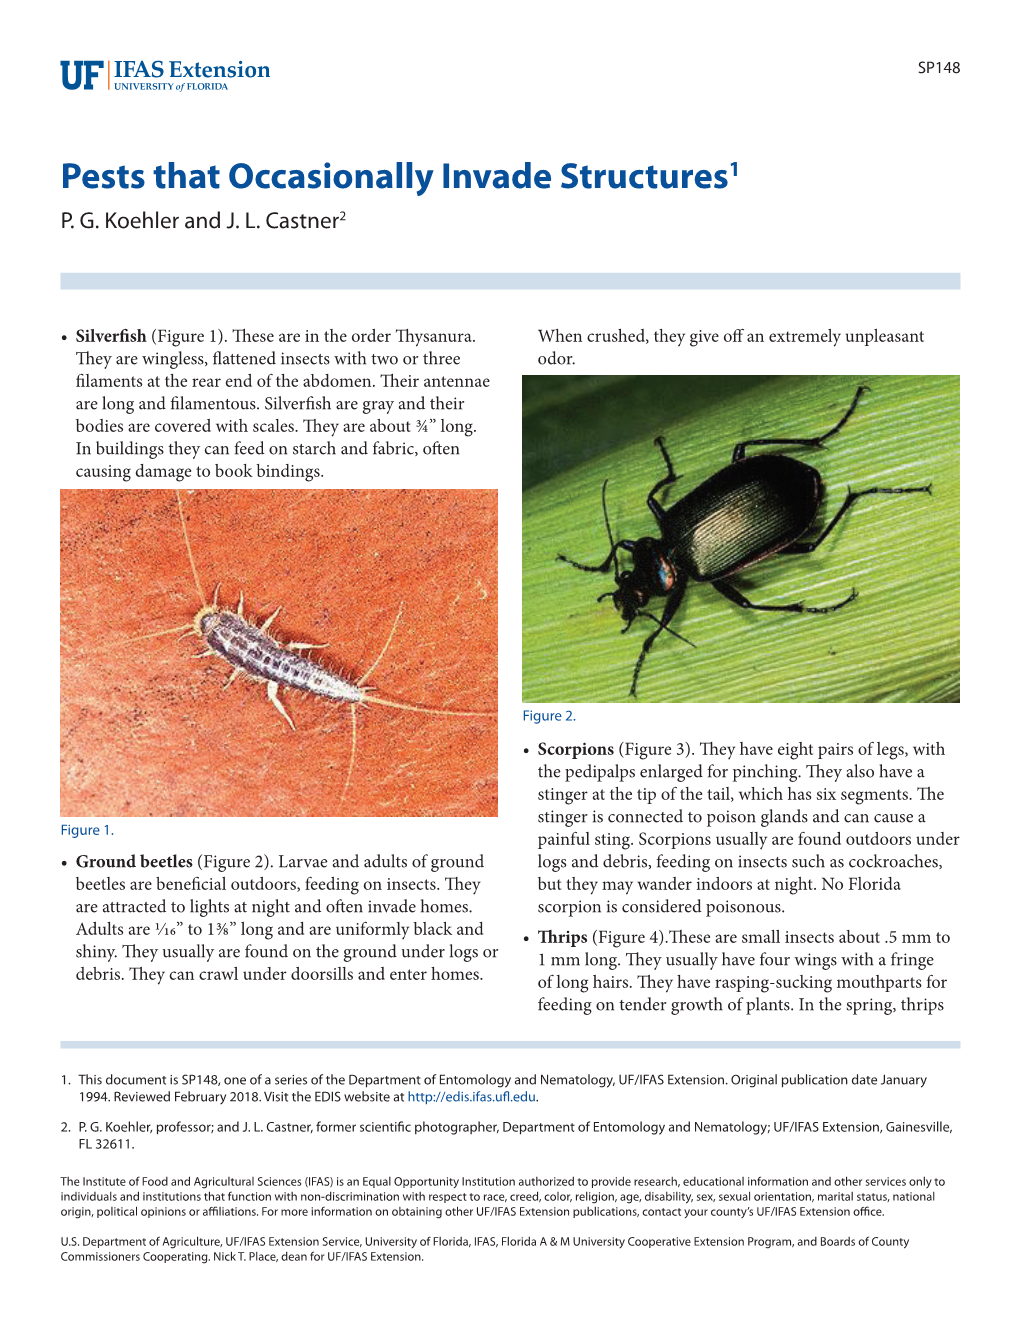 Pests That Occasionally Invade Structures1 P